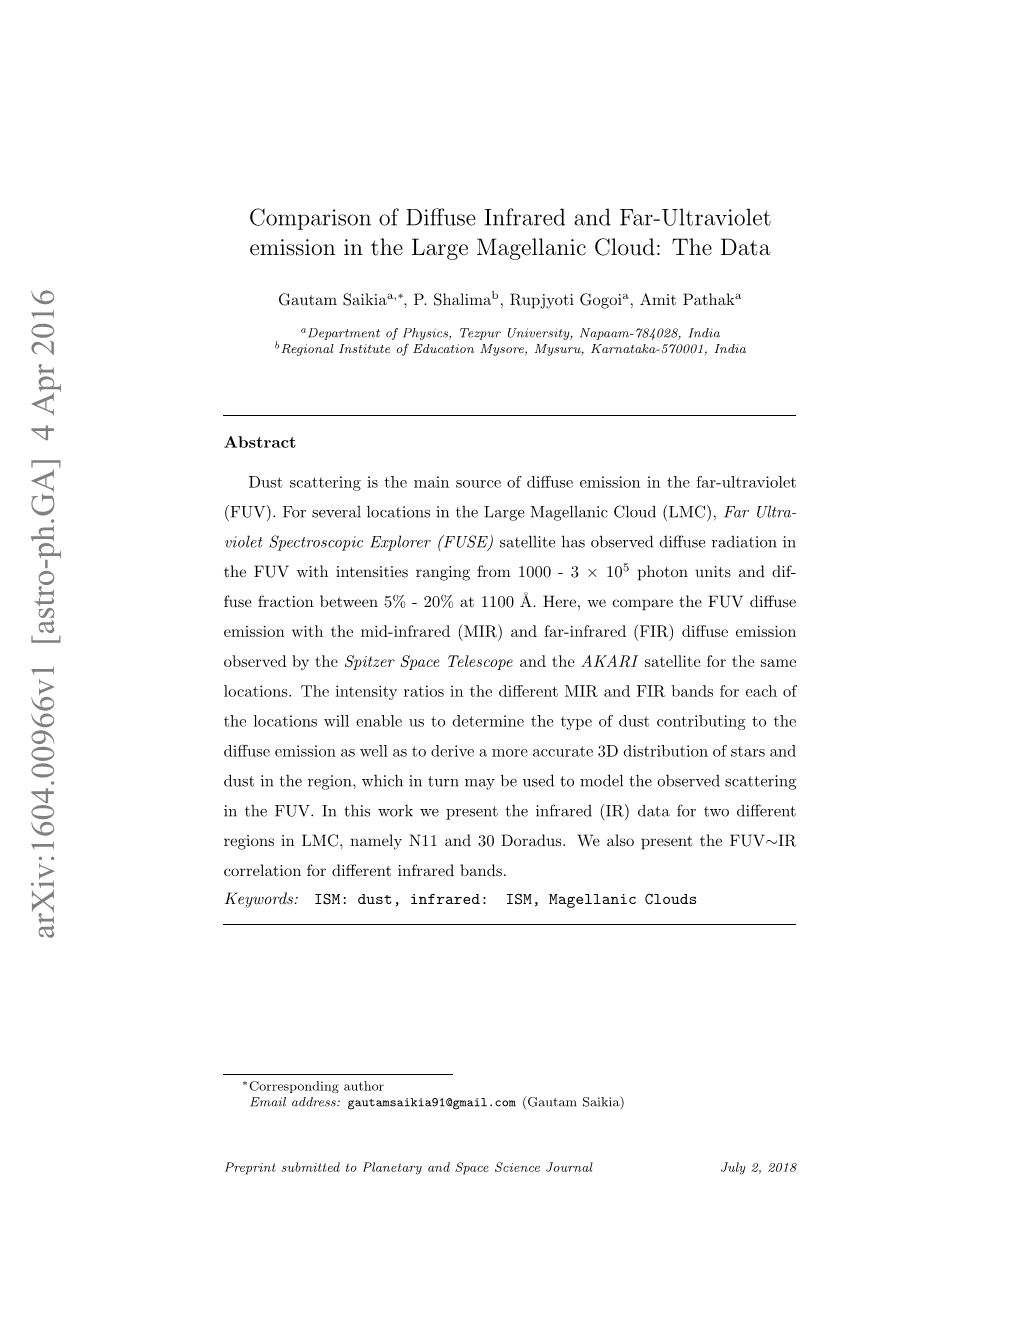 Comparison of Diffuse Infrared and Far-Ultraviolet Emission in The